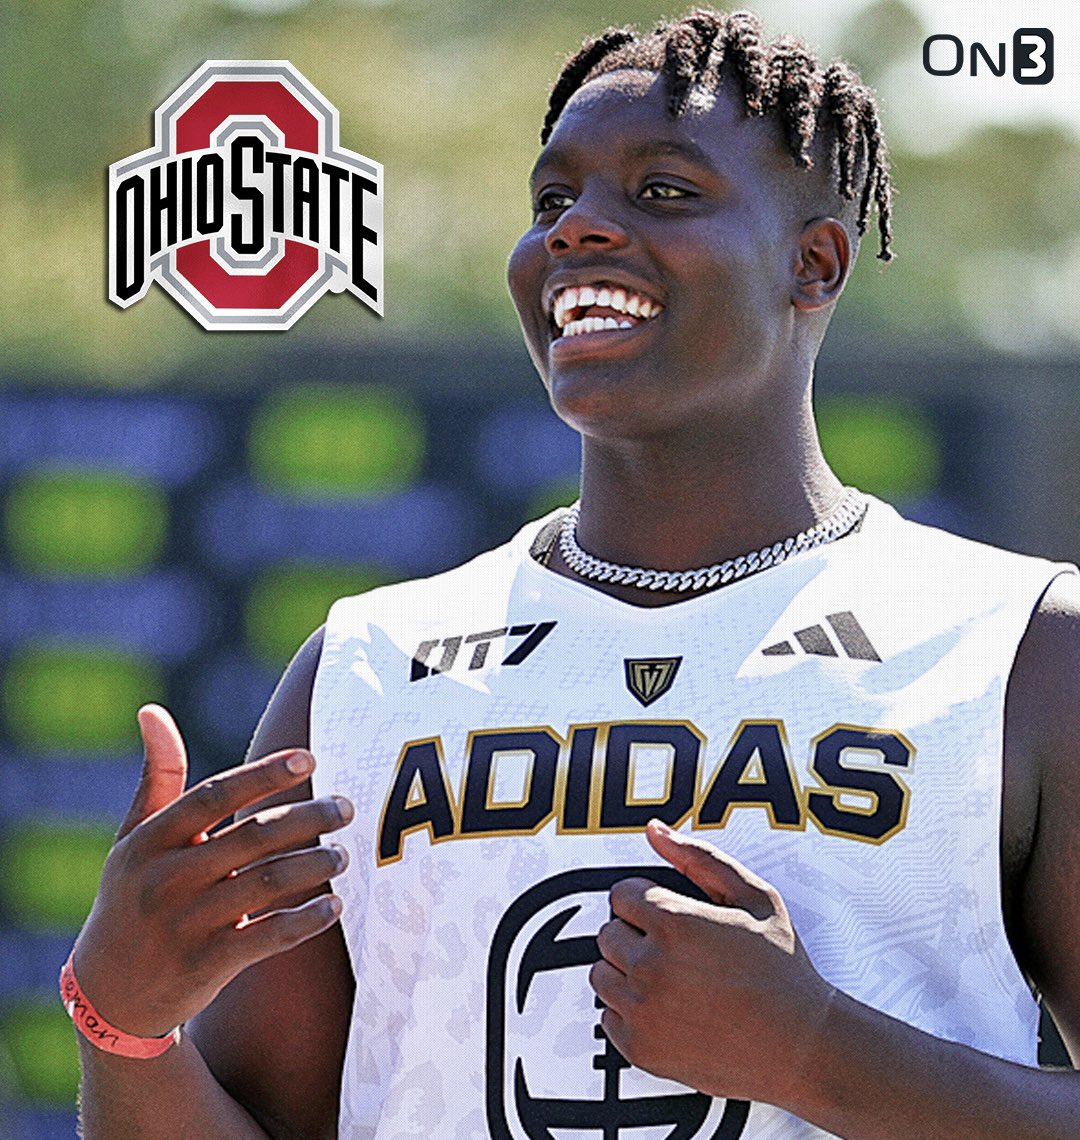 Five-Star Plus+ OT David Sanders Jr. and his family enjoyed their weekend at Ohio State, per @SWiltfong_🌰 “From a football standpoint, there is land of opportunity for David to develop.” Read: on3.com/news/david-san…